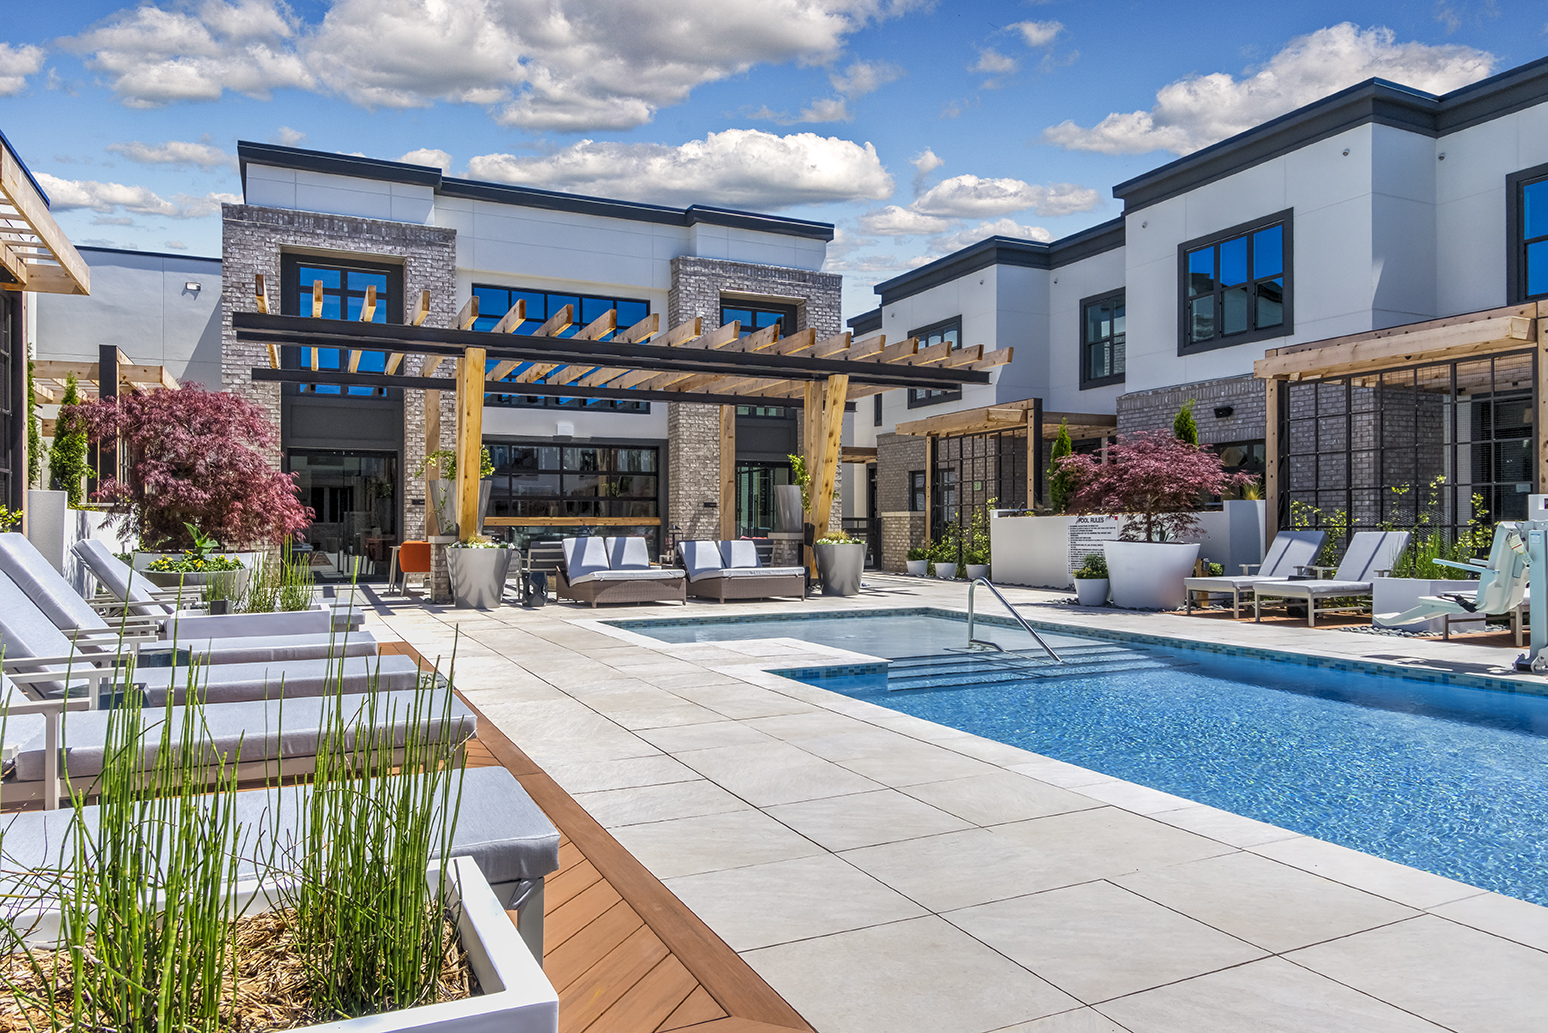 Hazel SouthPark central courtyard with pool surrounded by apartments and townes